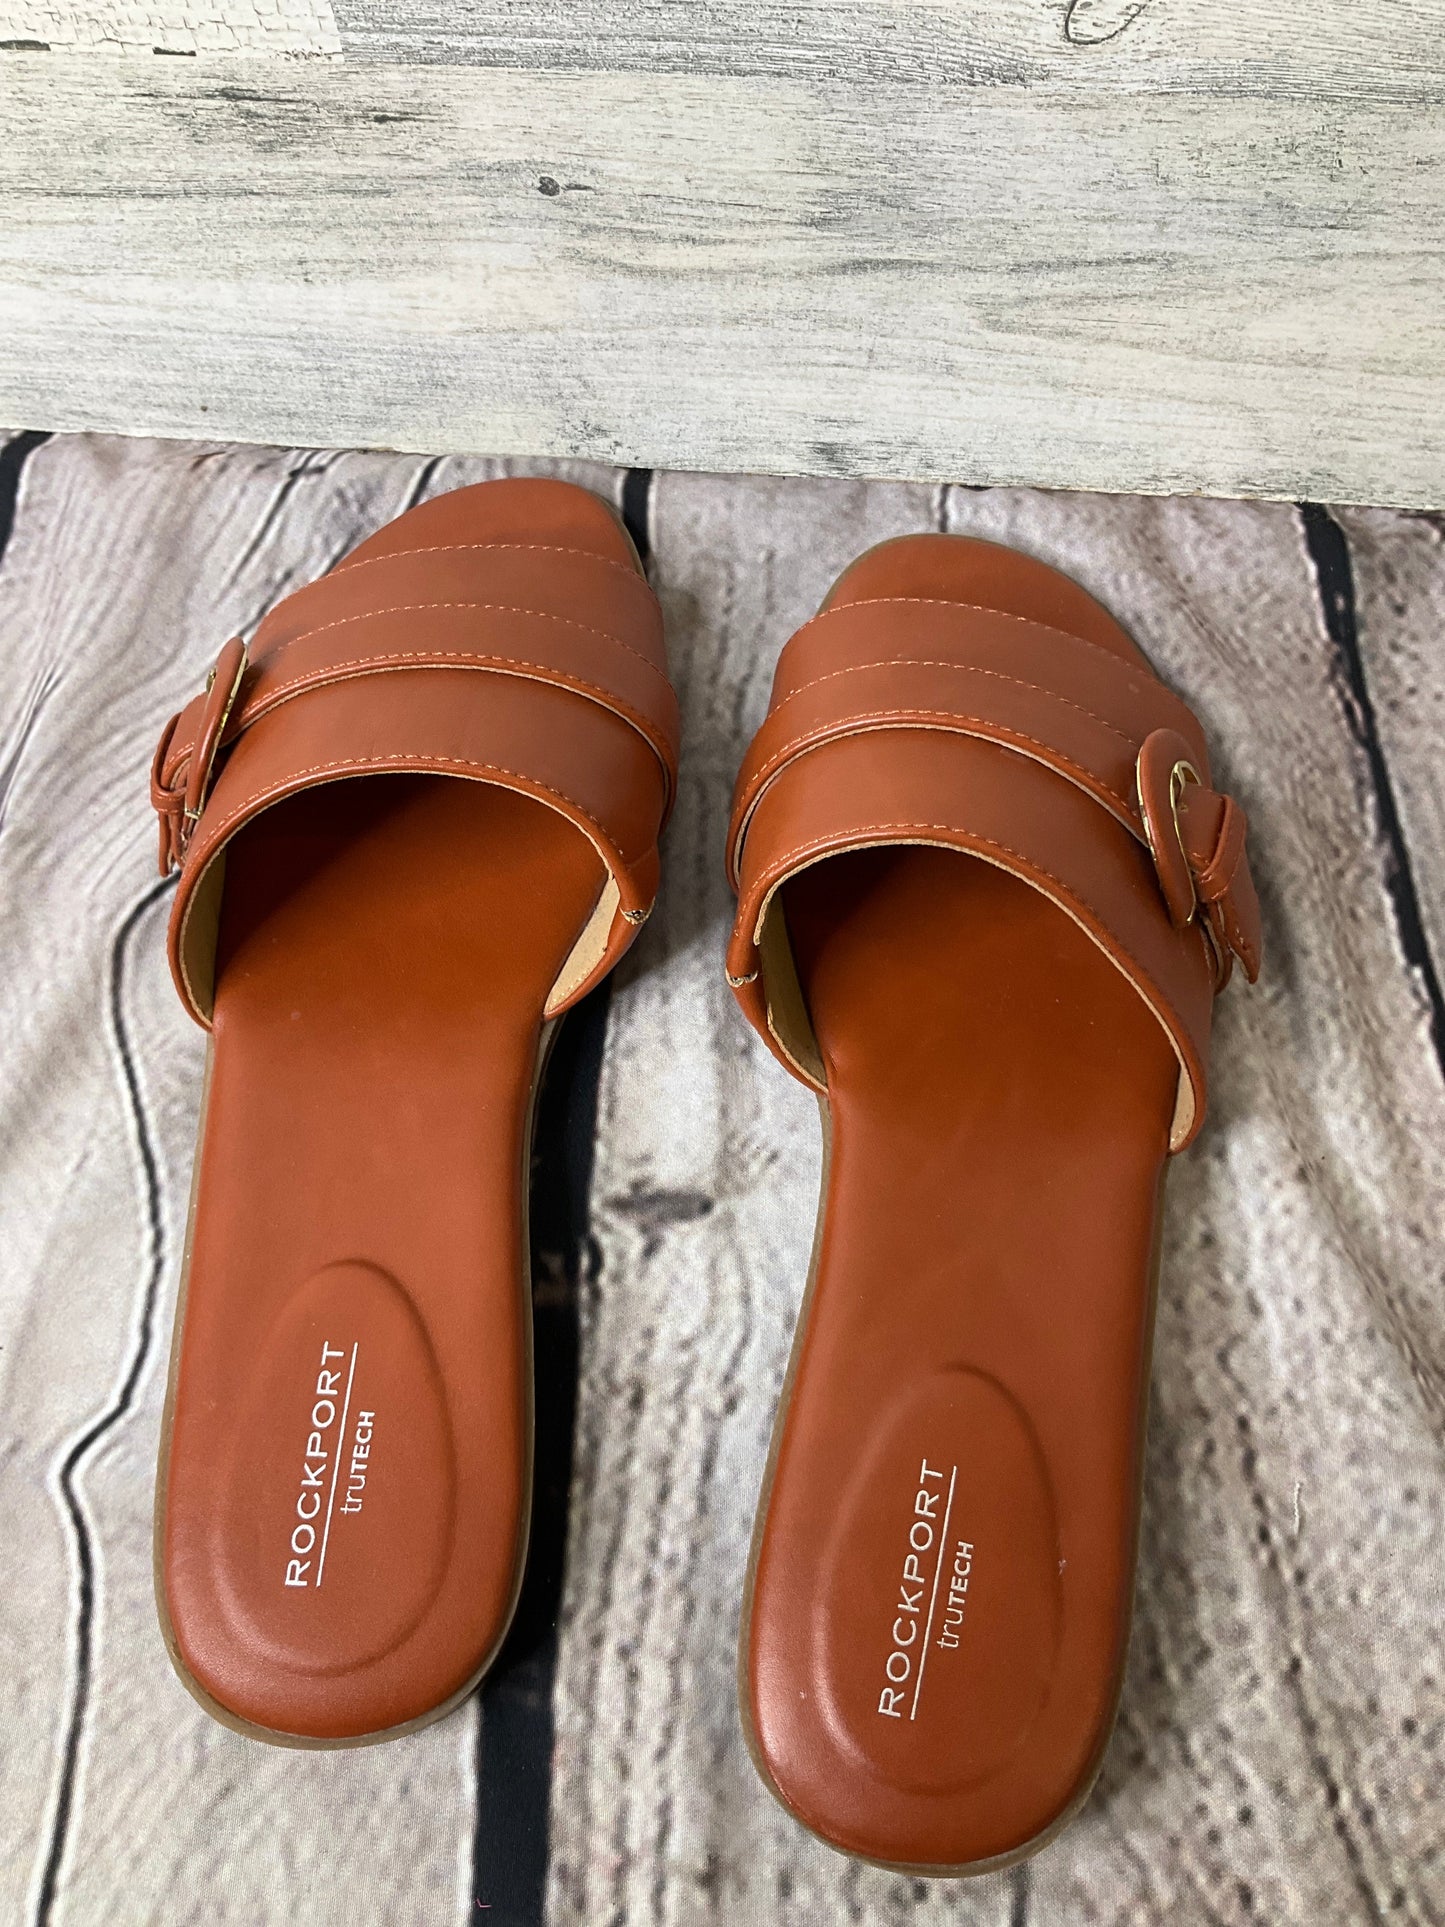 Sandals Flats By Rockport  Size: 9